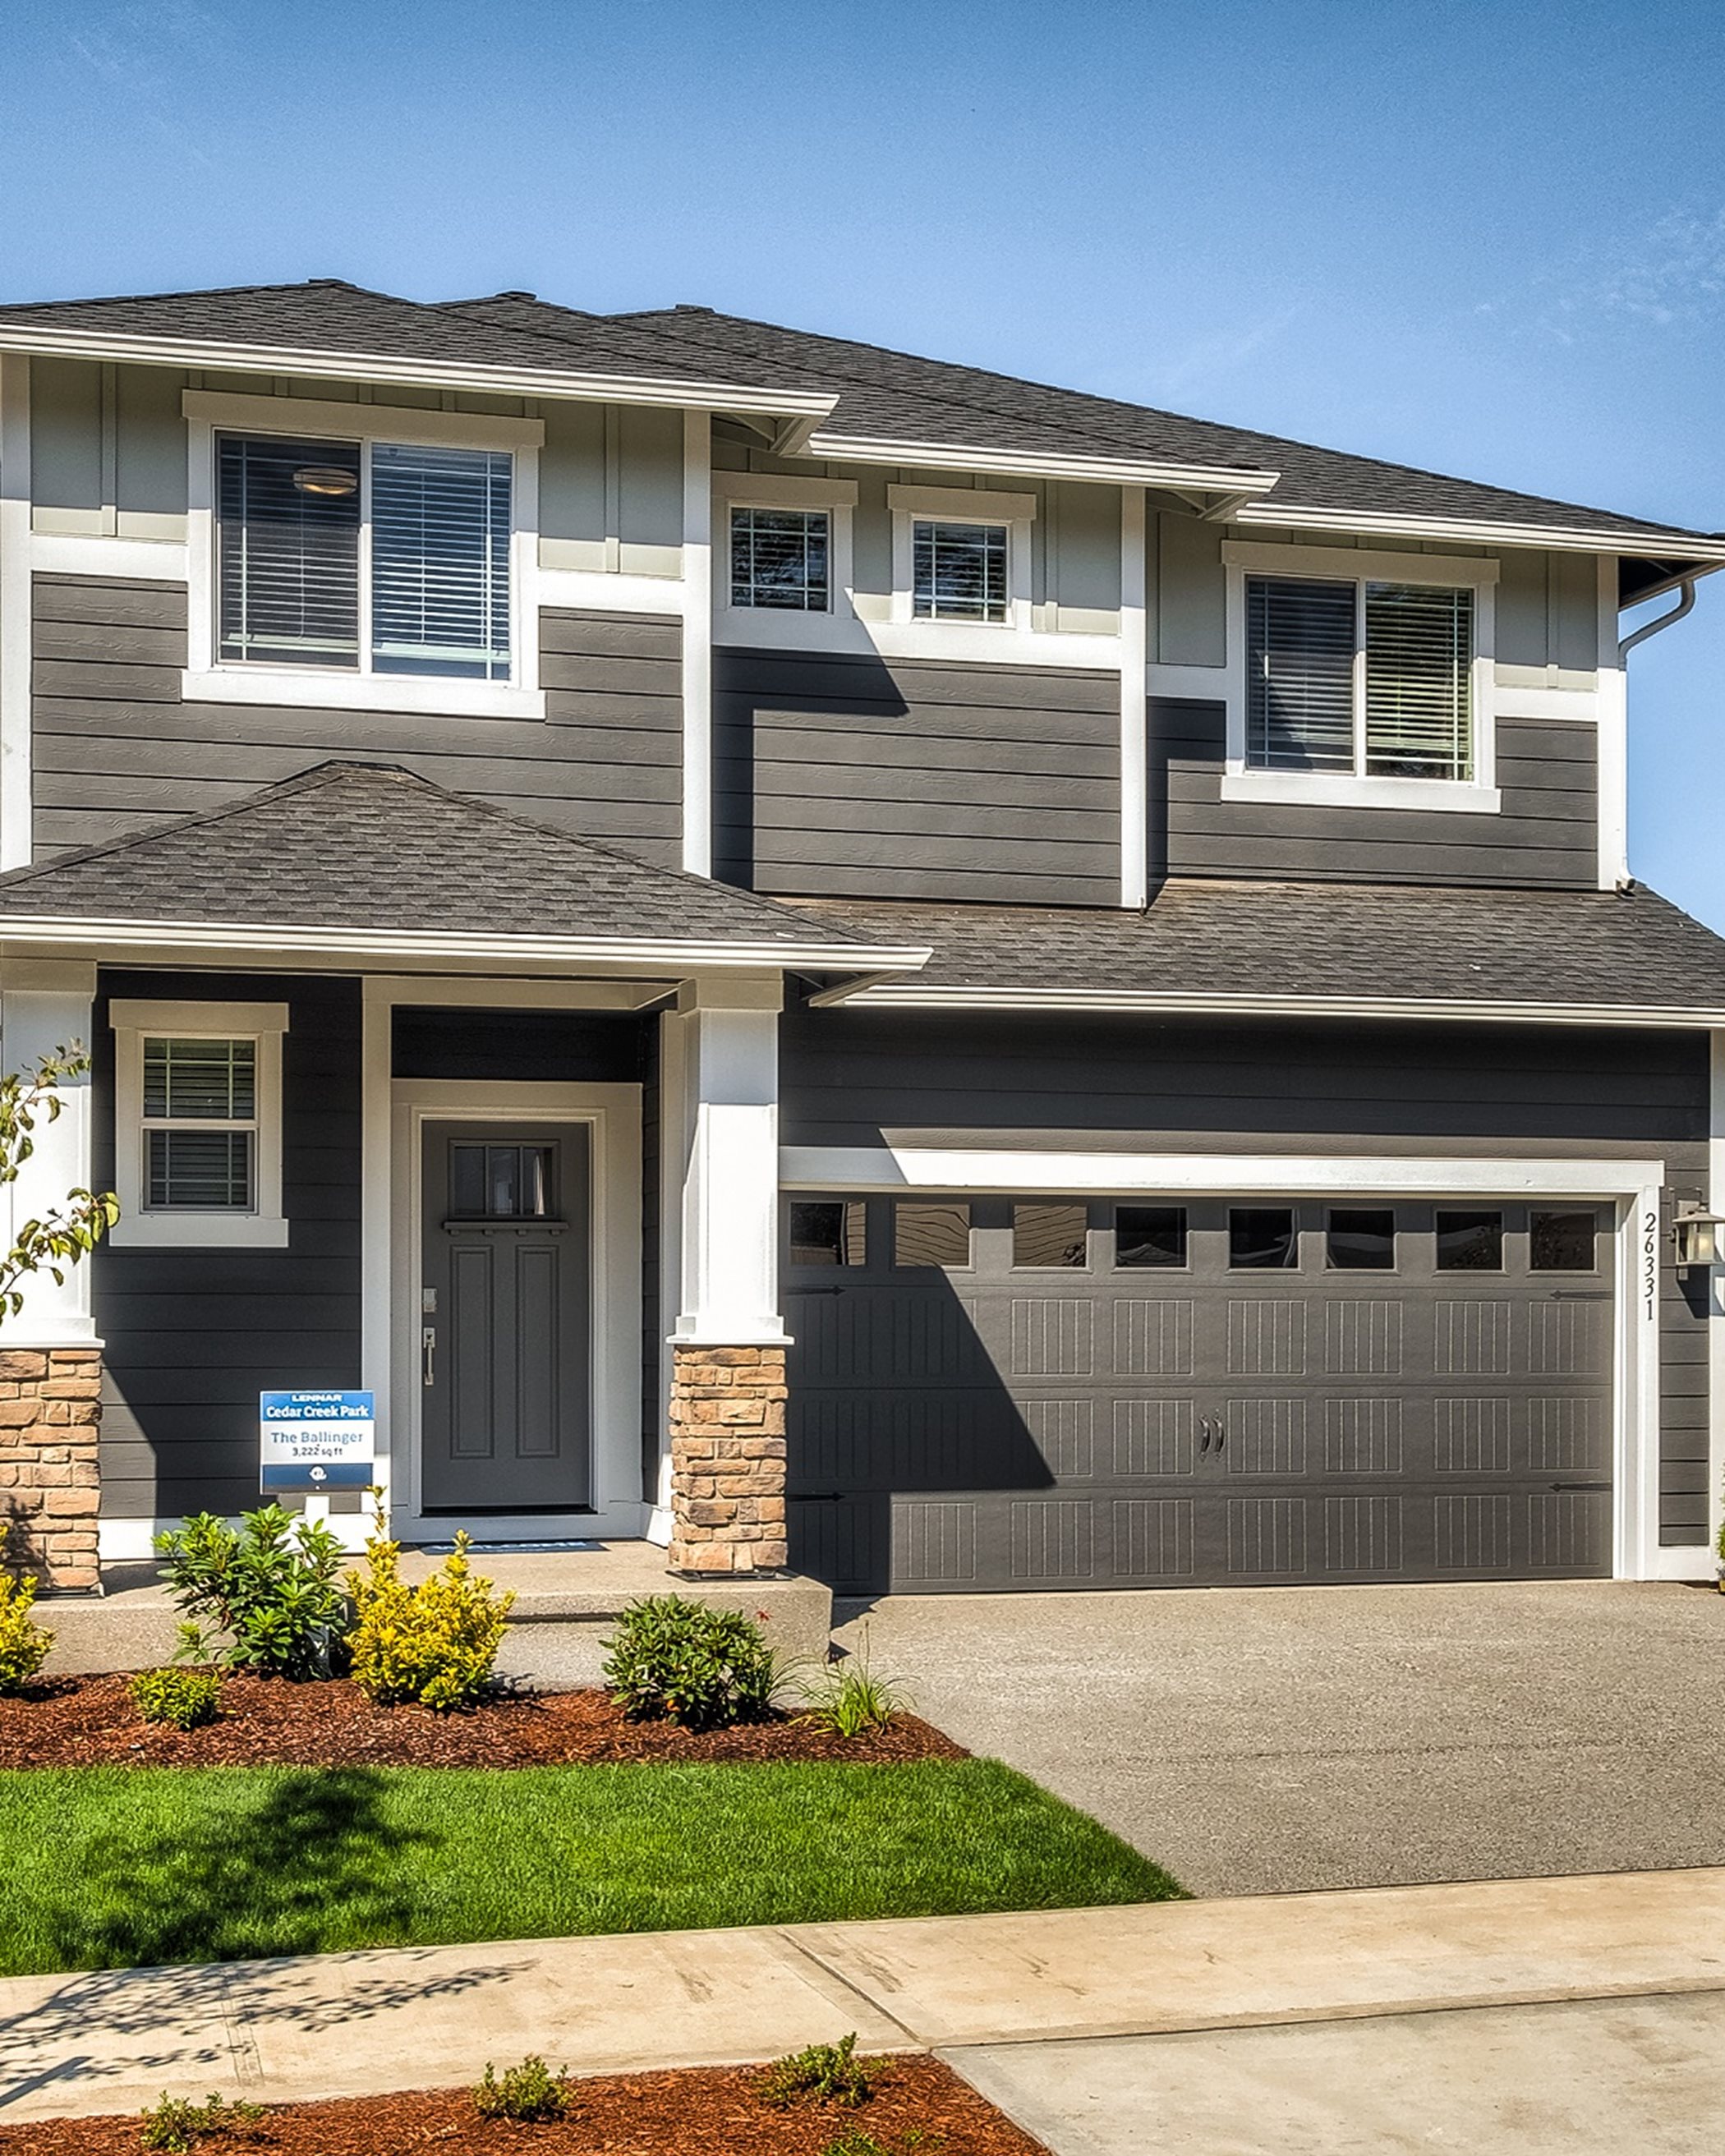 We don't just build homes, we build communities. There is nothing quite like moving into a fresh new Lennar community where everyone has just arrived. Not to mention you'll receive post-move in assistance from our wonderful Customer Care team!